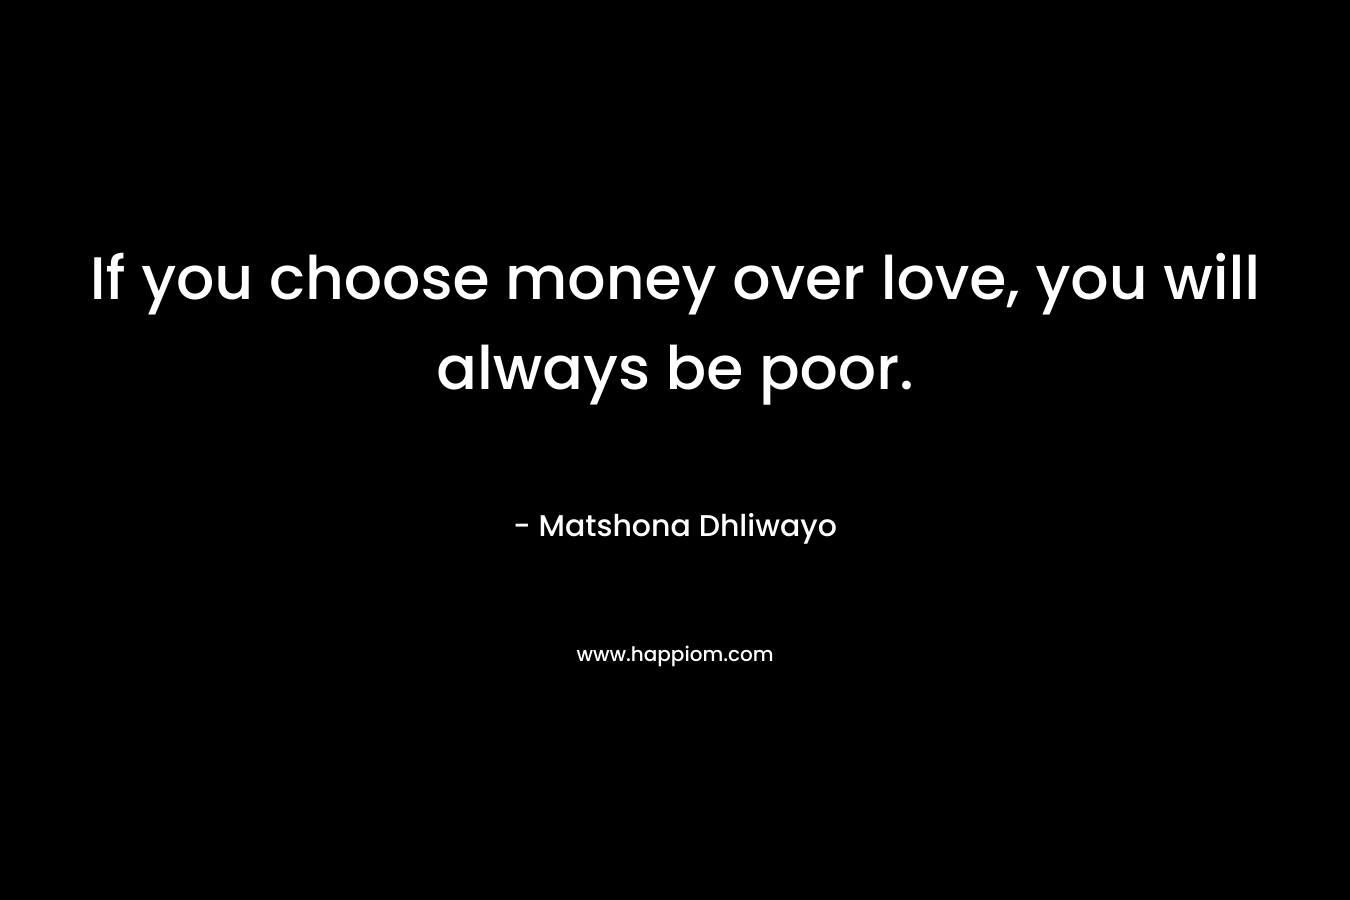 If you choose money over love, you will always be poor.